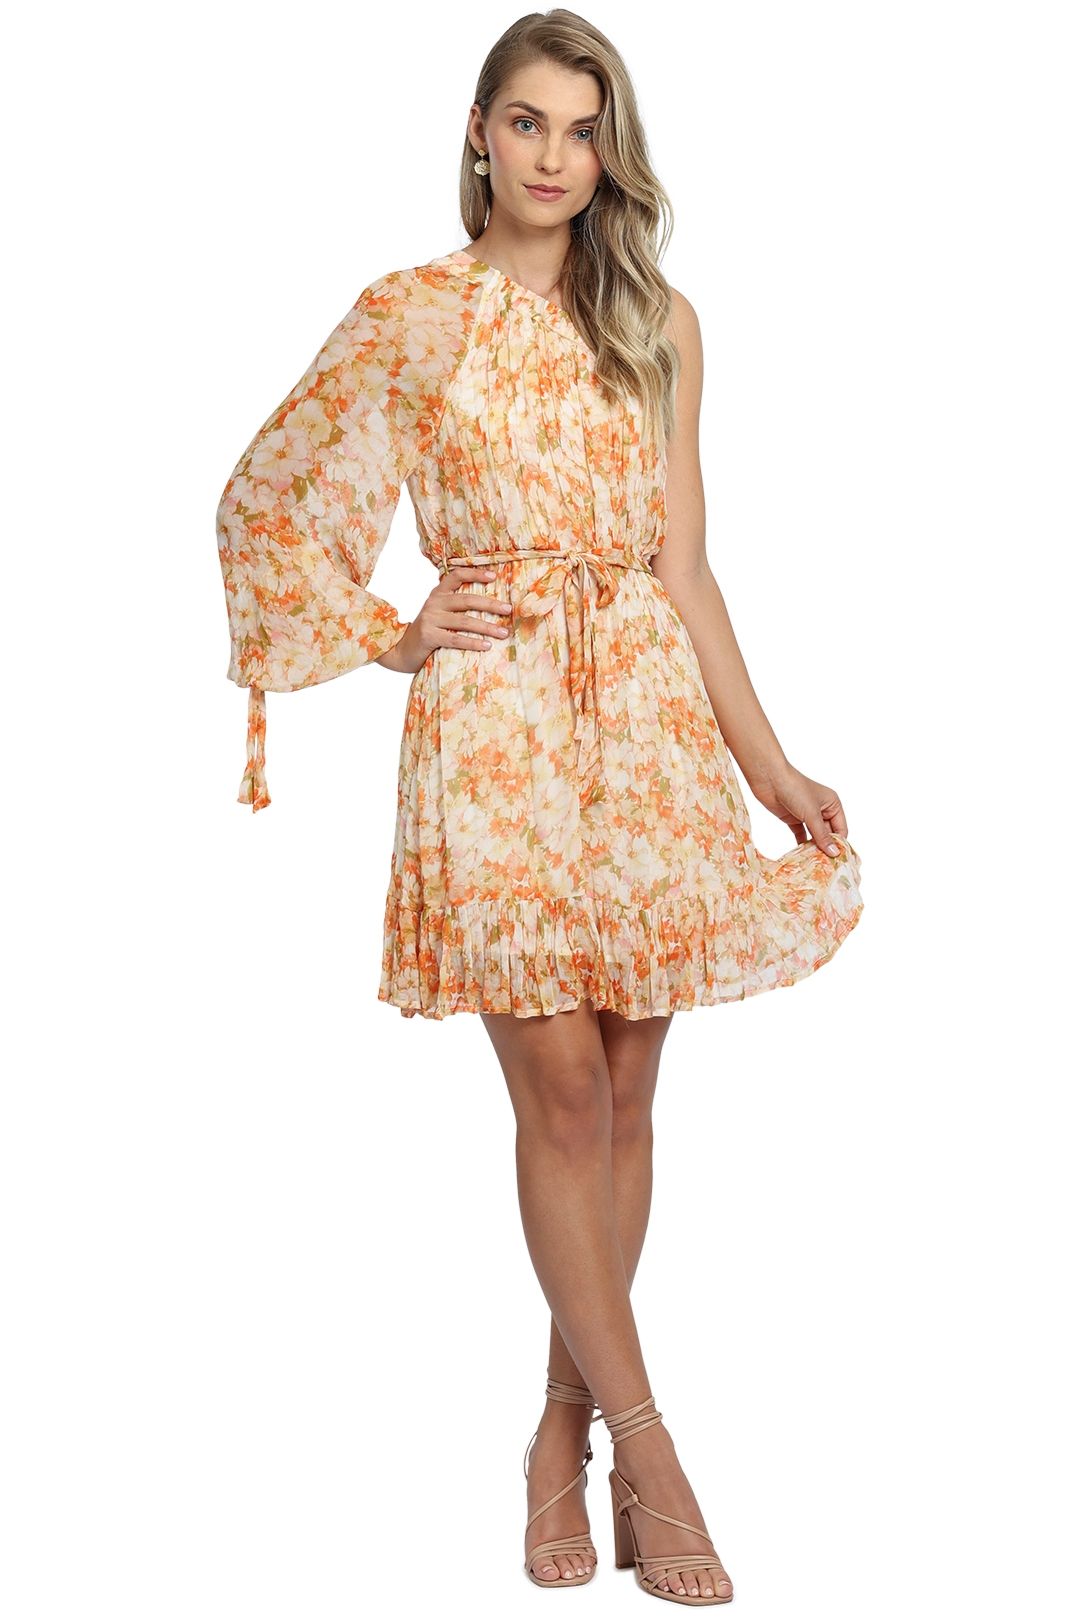 Ministry of Style Spring Meadows Mini Dress floral print